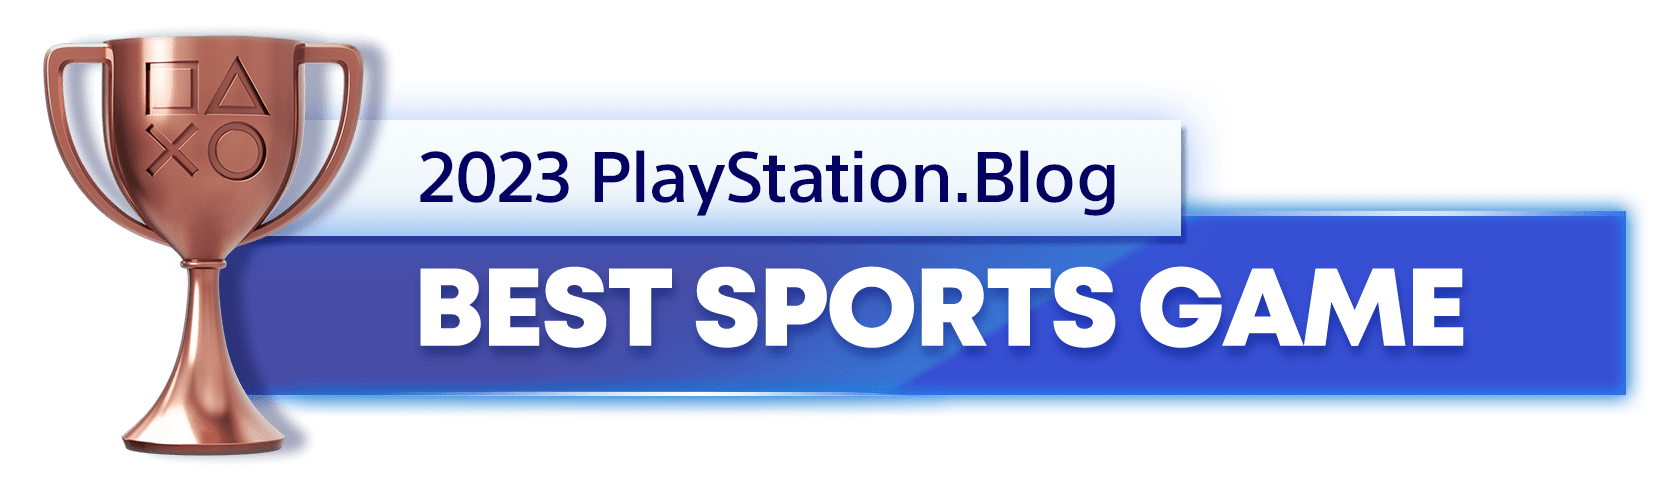 Bronze Trophy for the 2023 PlayStation Blog Best Sports Game Winner